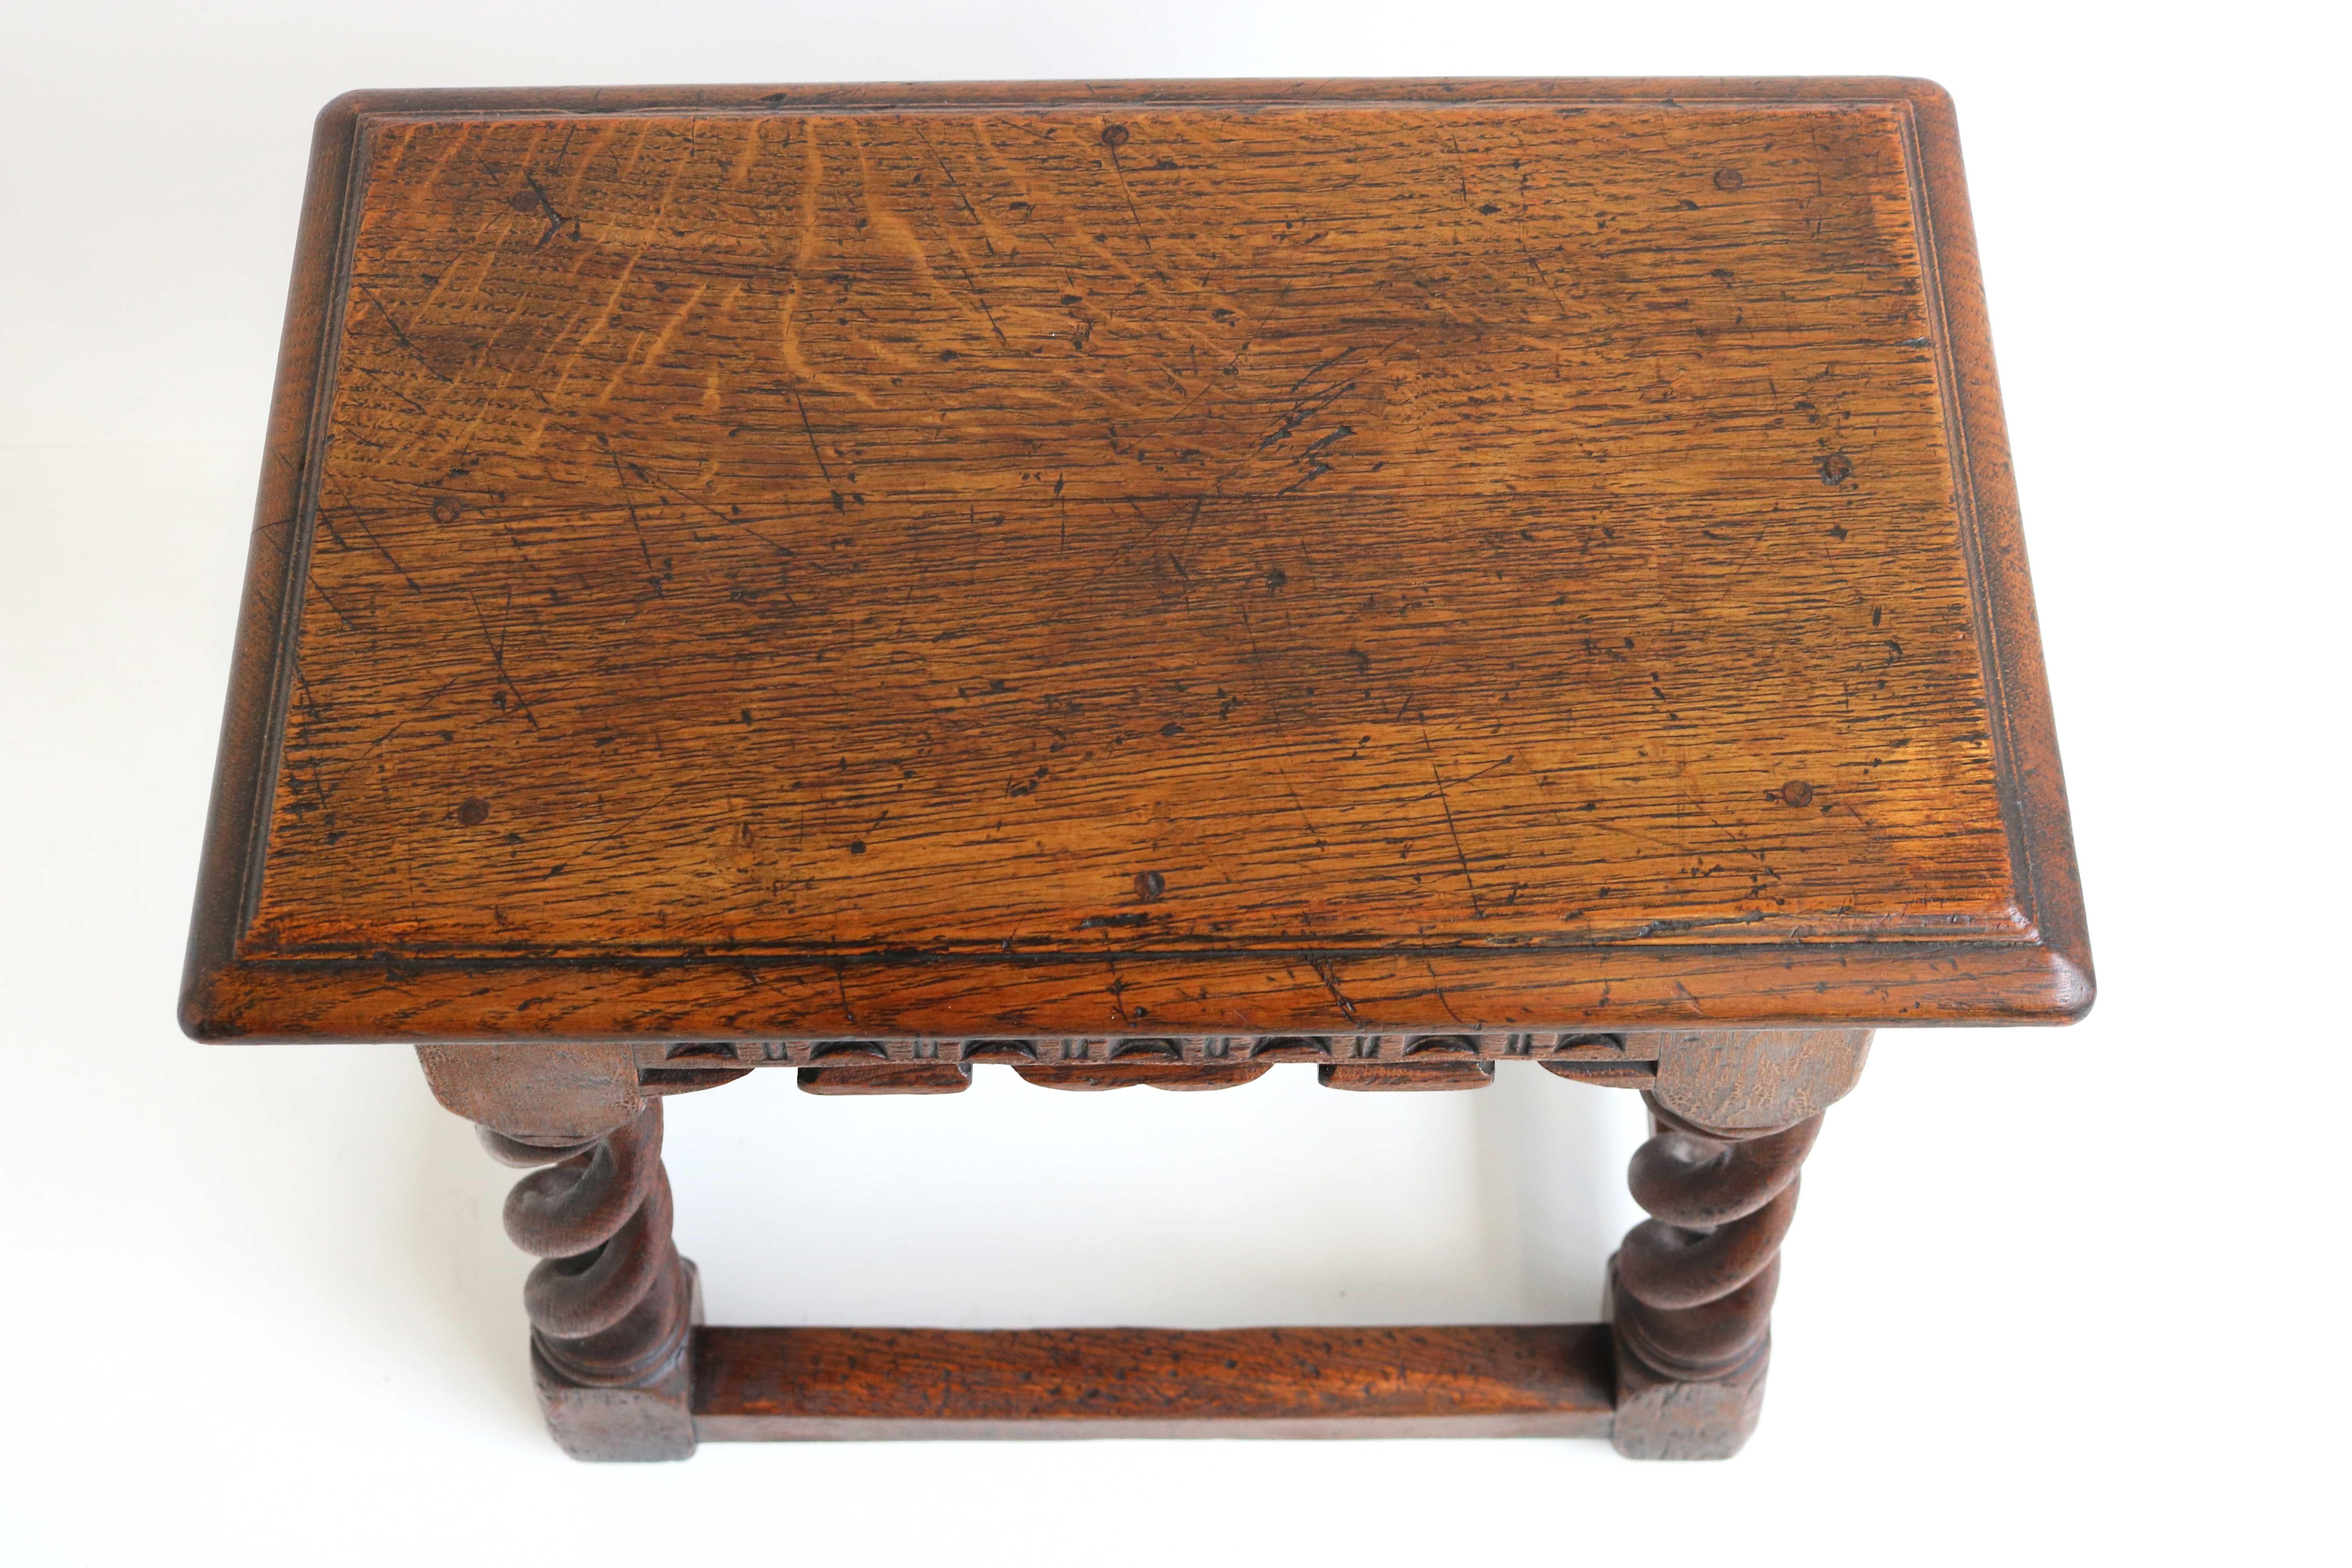 Hand-Carved Antique Rare English Open Barley Twist Splaying Legs Oak Hand Carved Joint Stool